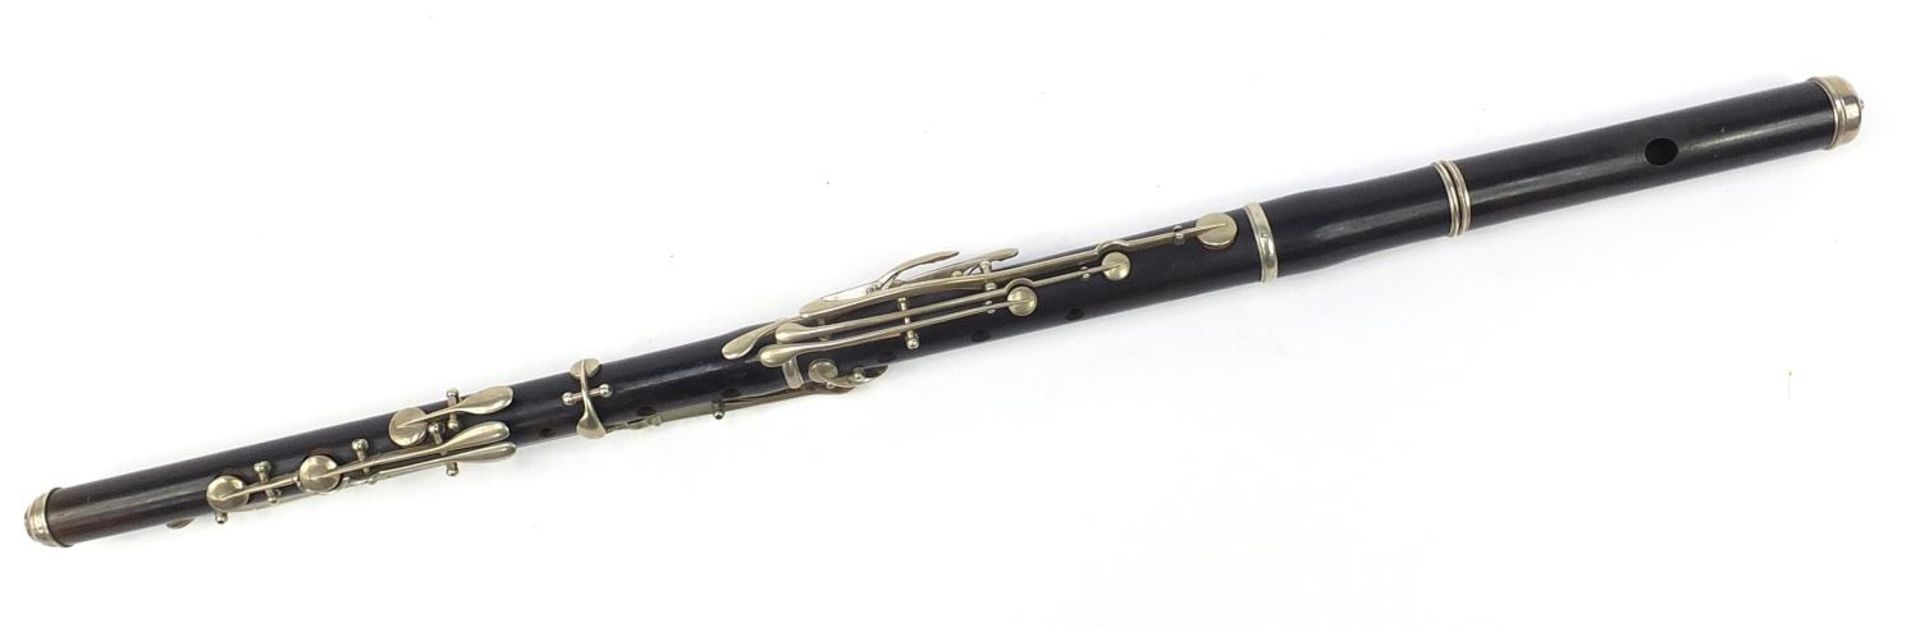 Jul Ludemann rosewood three piece flute with silver plated mounts and case - Image 2 of 9